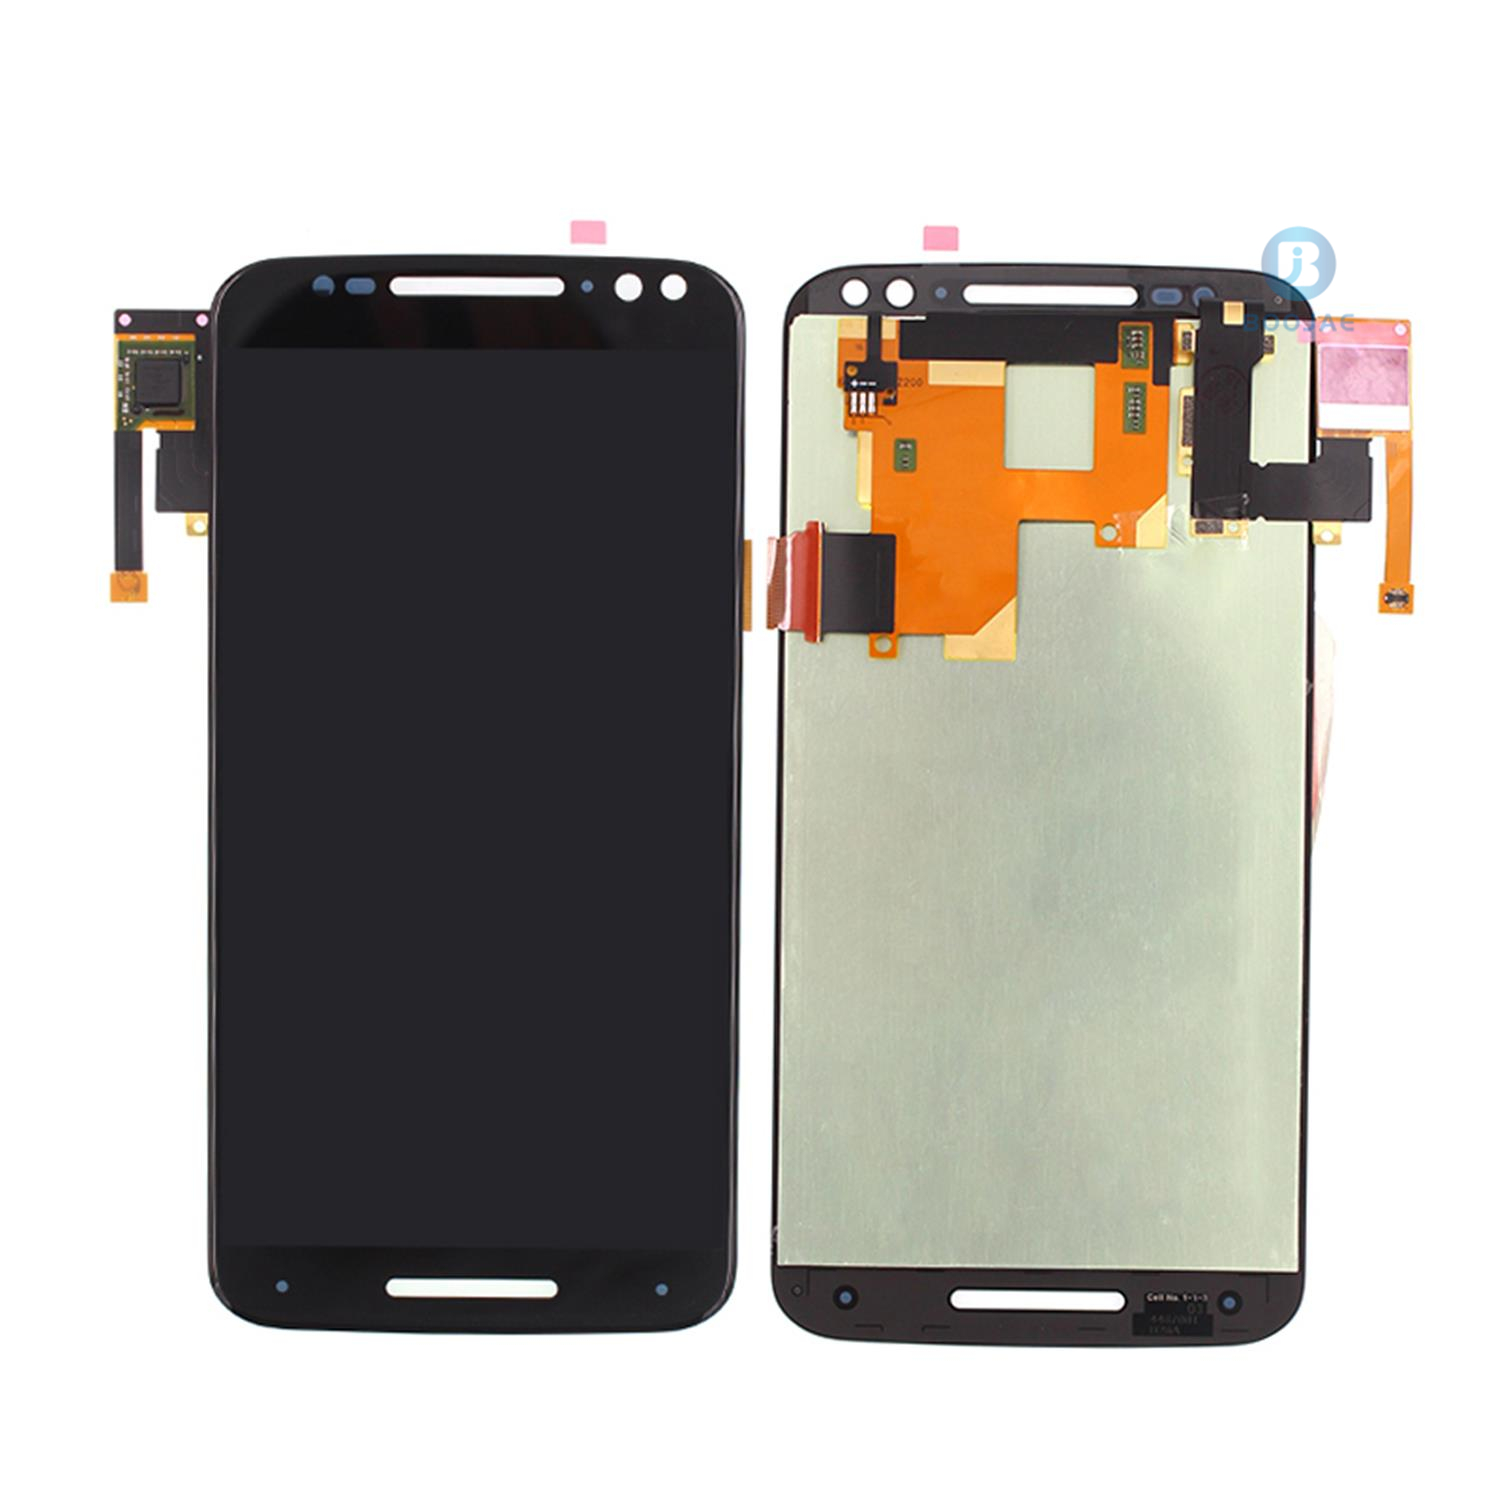 For Motorola Moto X Style LCD Screen Display and Touch Panel Digitizer Assembly Replacement